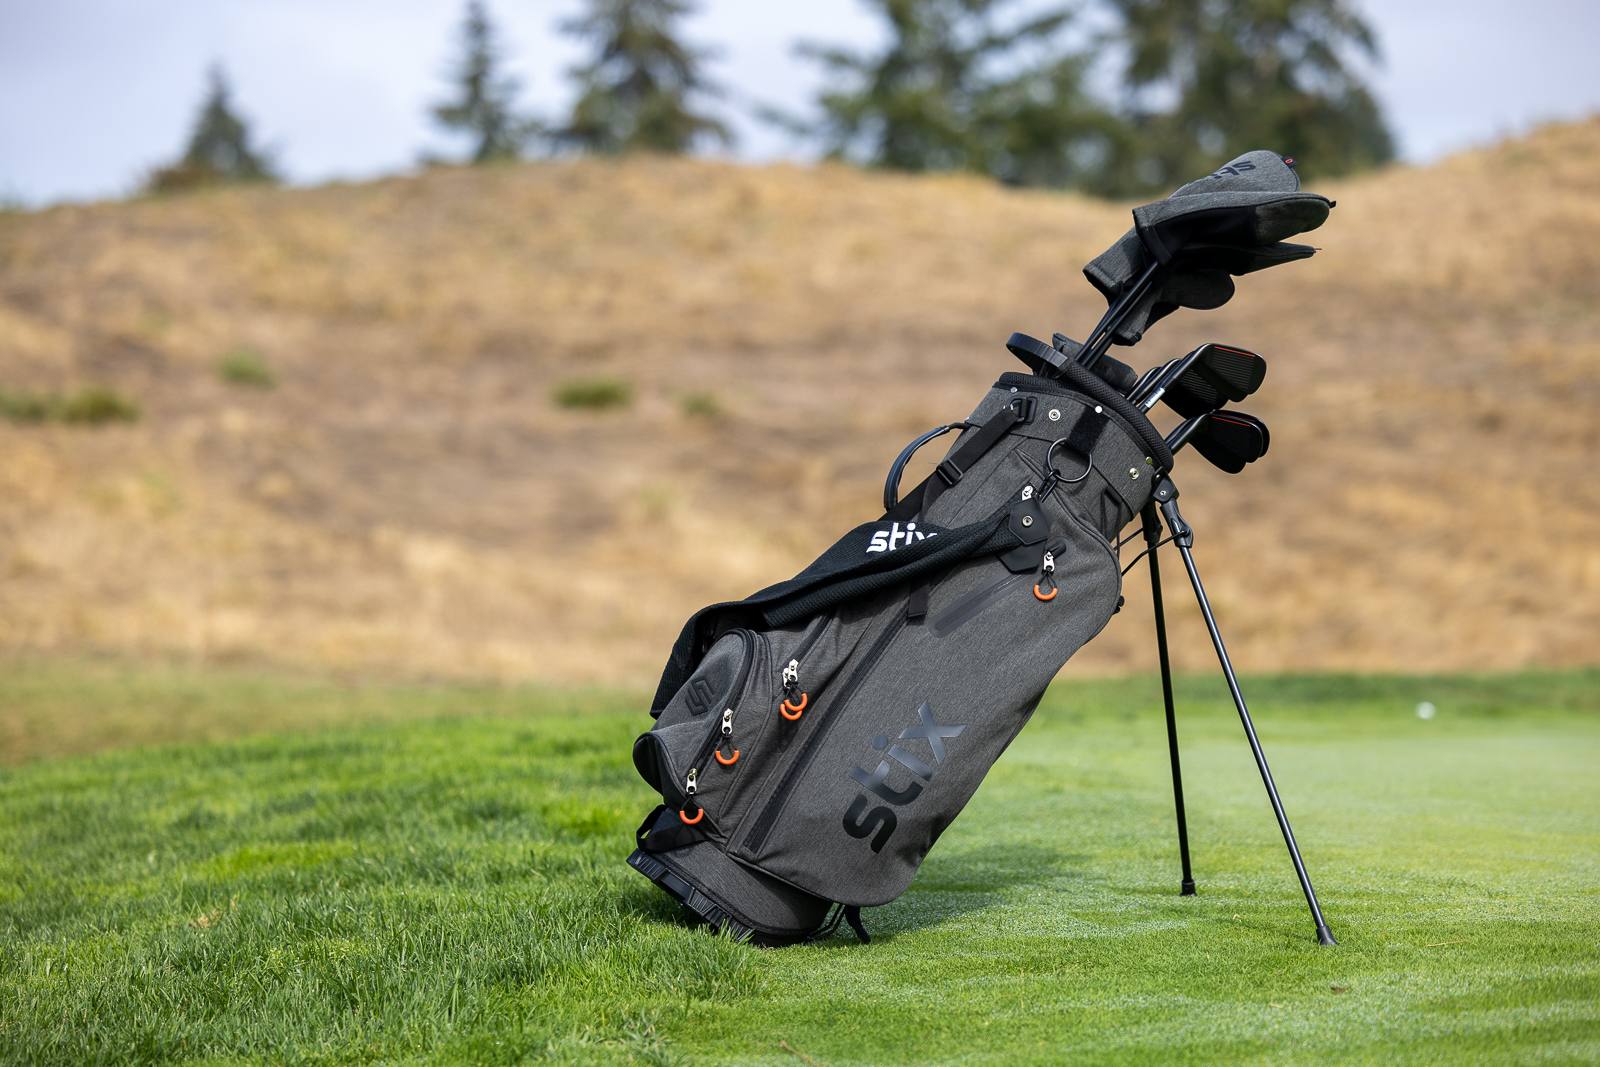 hoste auroch Udstyr Stix Golf Clubs Review: Are they the Best Value in Golf?